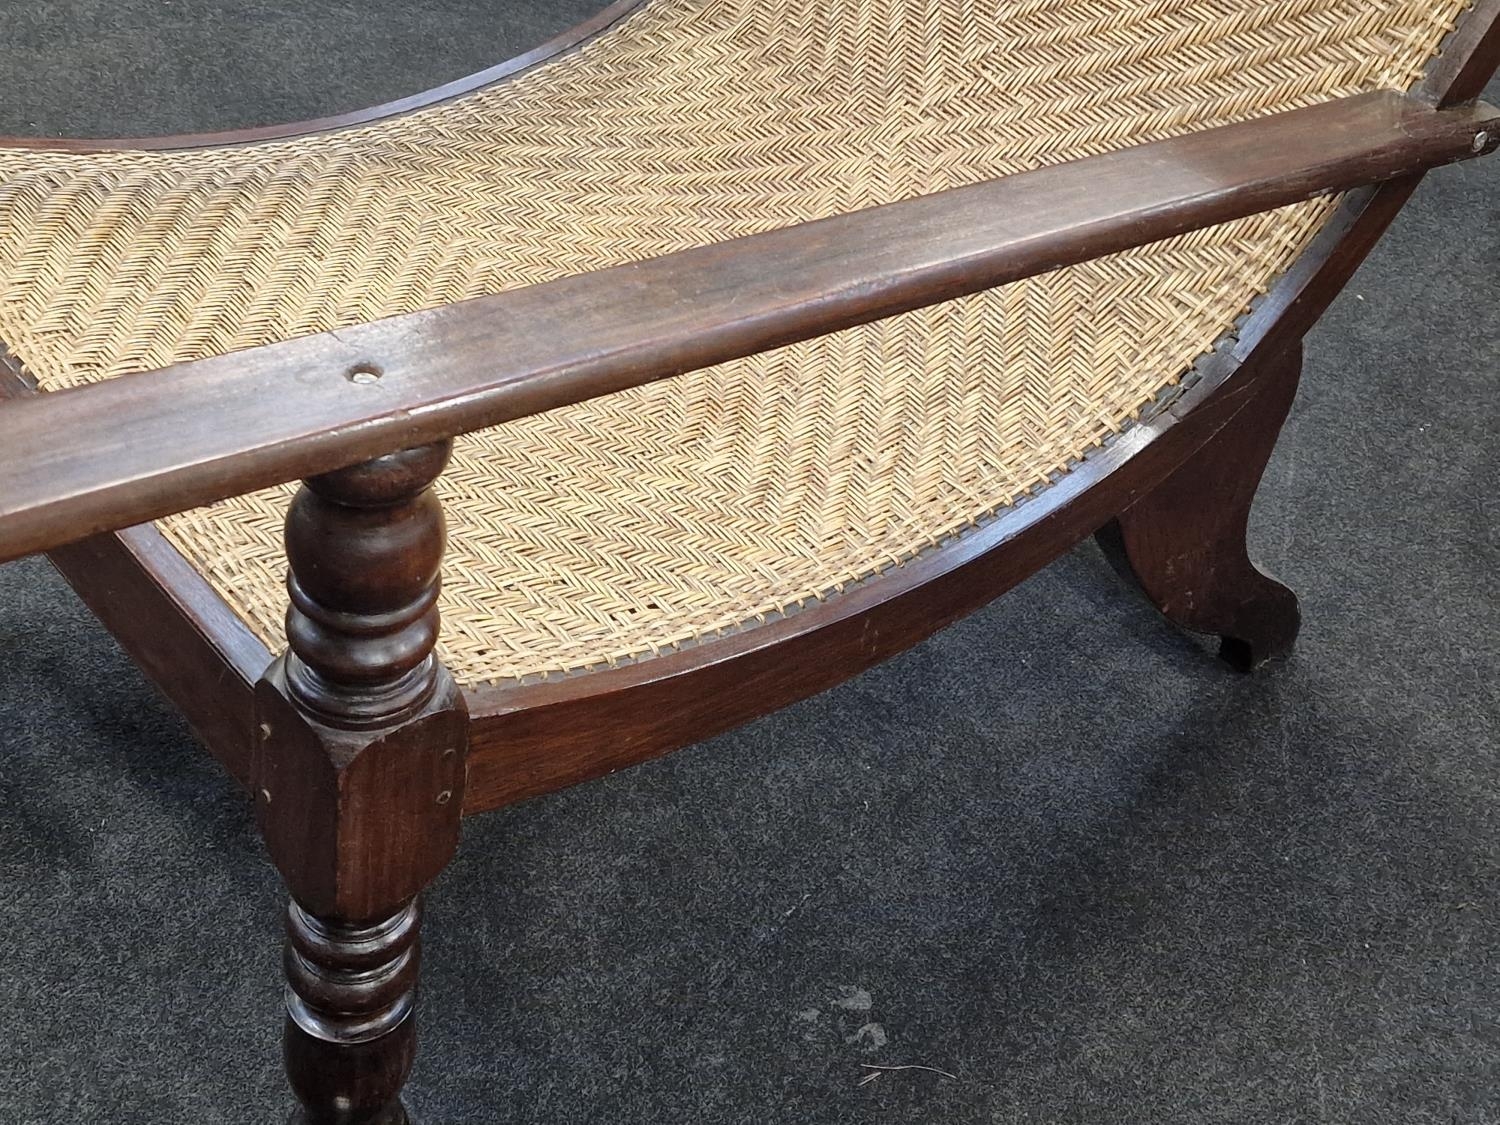 Anglo Dutch colonial Plantation chair with arm extenders on turned supports with a woven back rest - Image 3 of 5